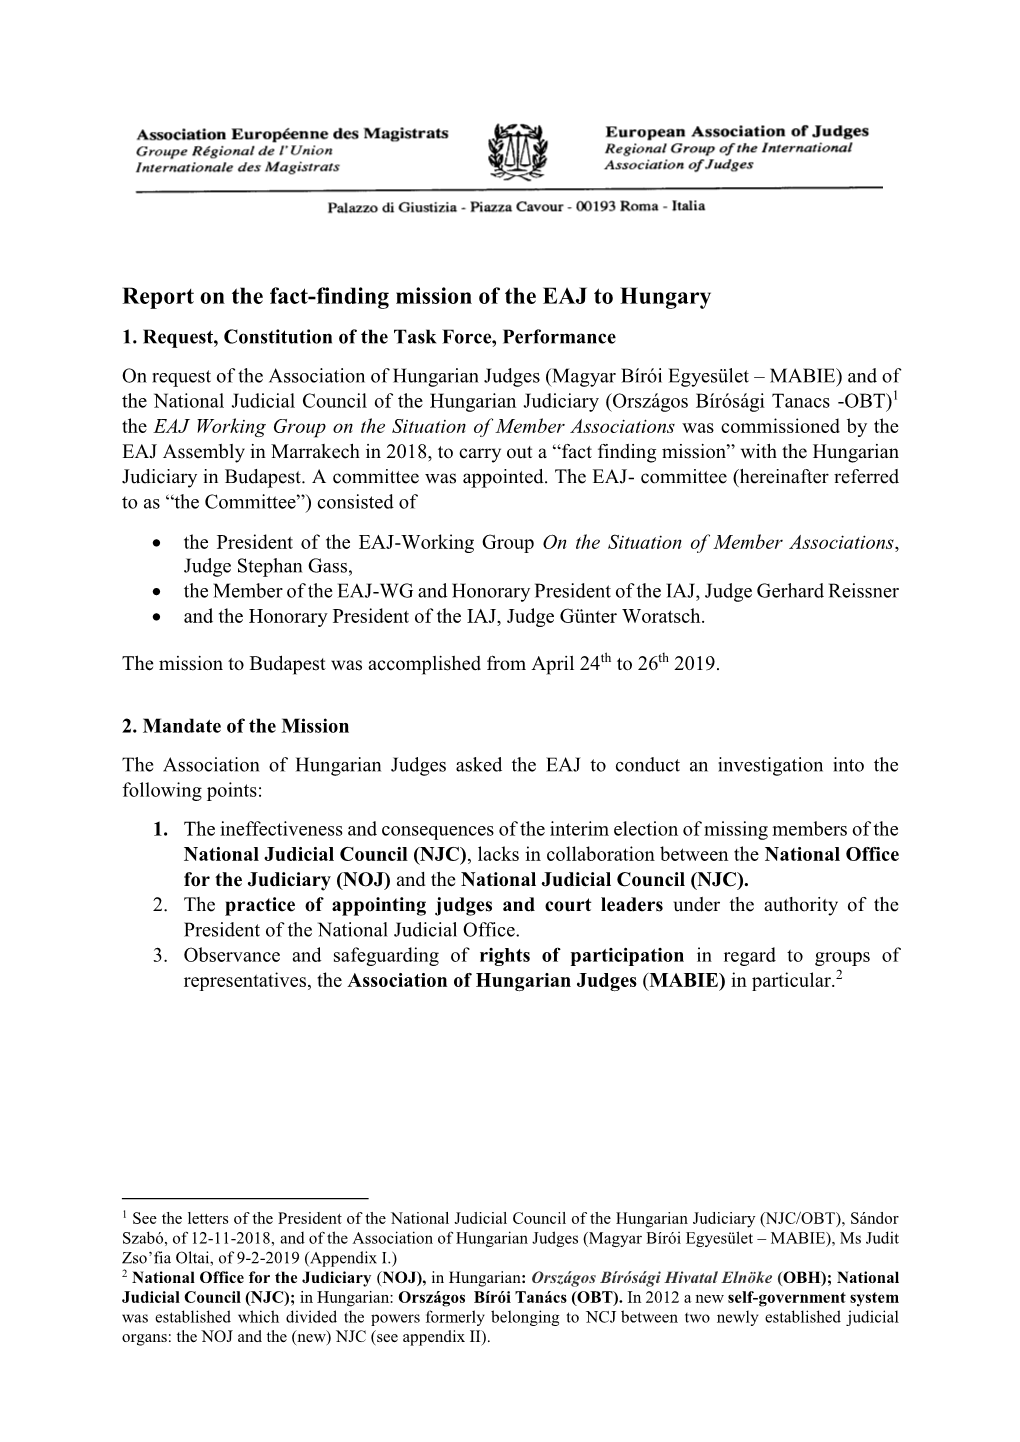 Report on the Fact-Finding Mission of the EAJ to Hungary 1